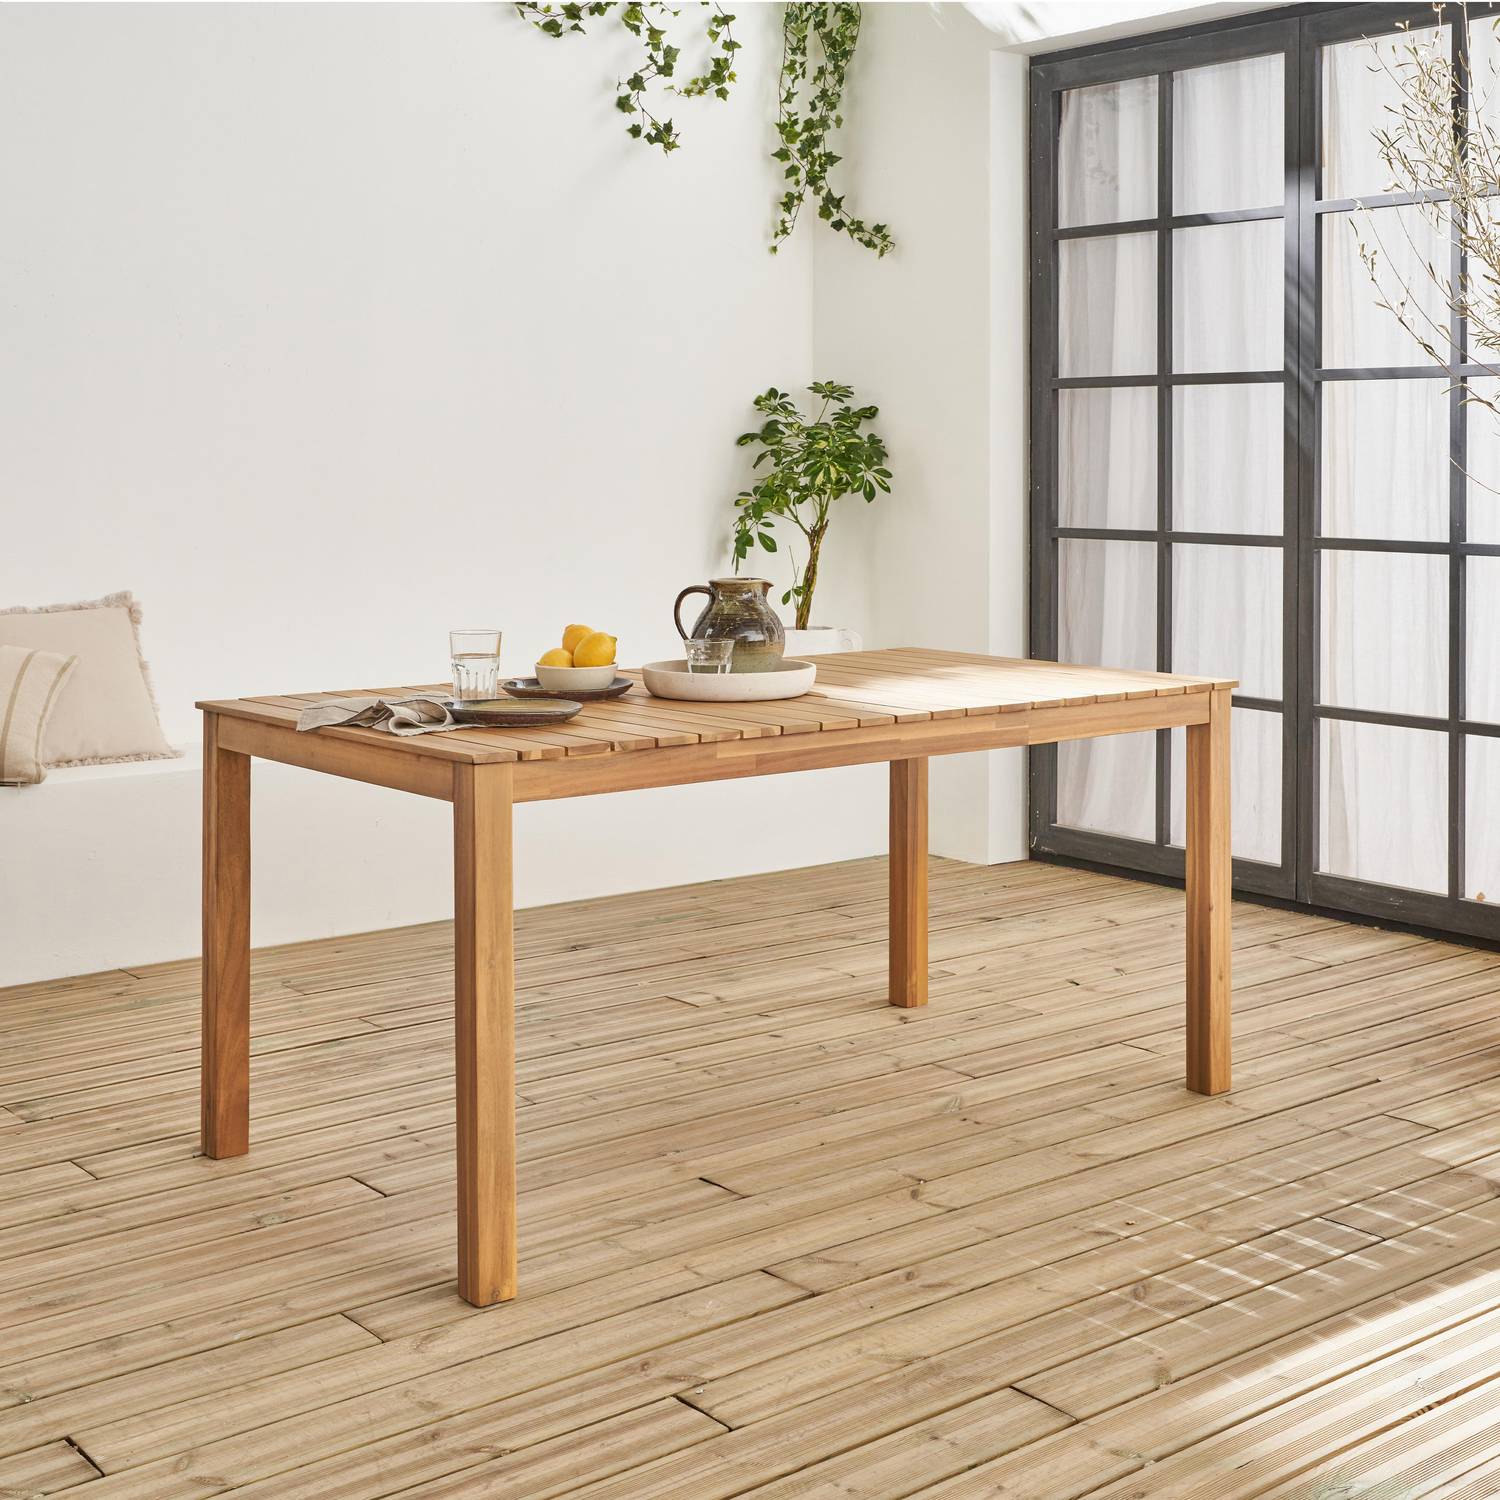 4 to 6-seater Indoor/outdoor table in acacia wood, 160cm, Cartama Photo1